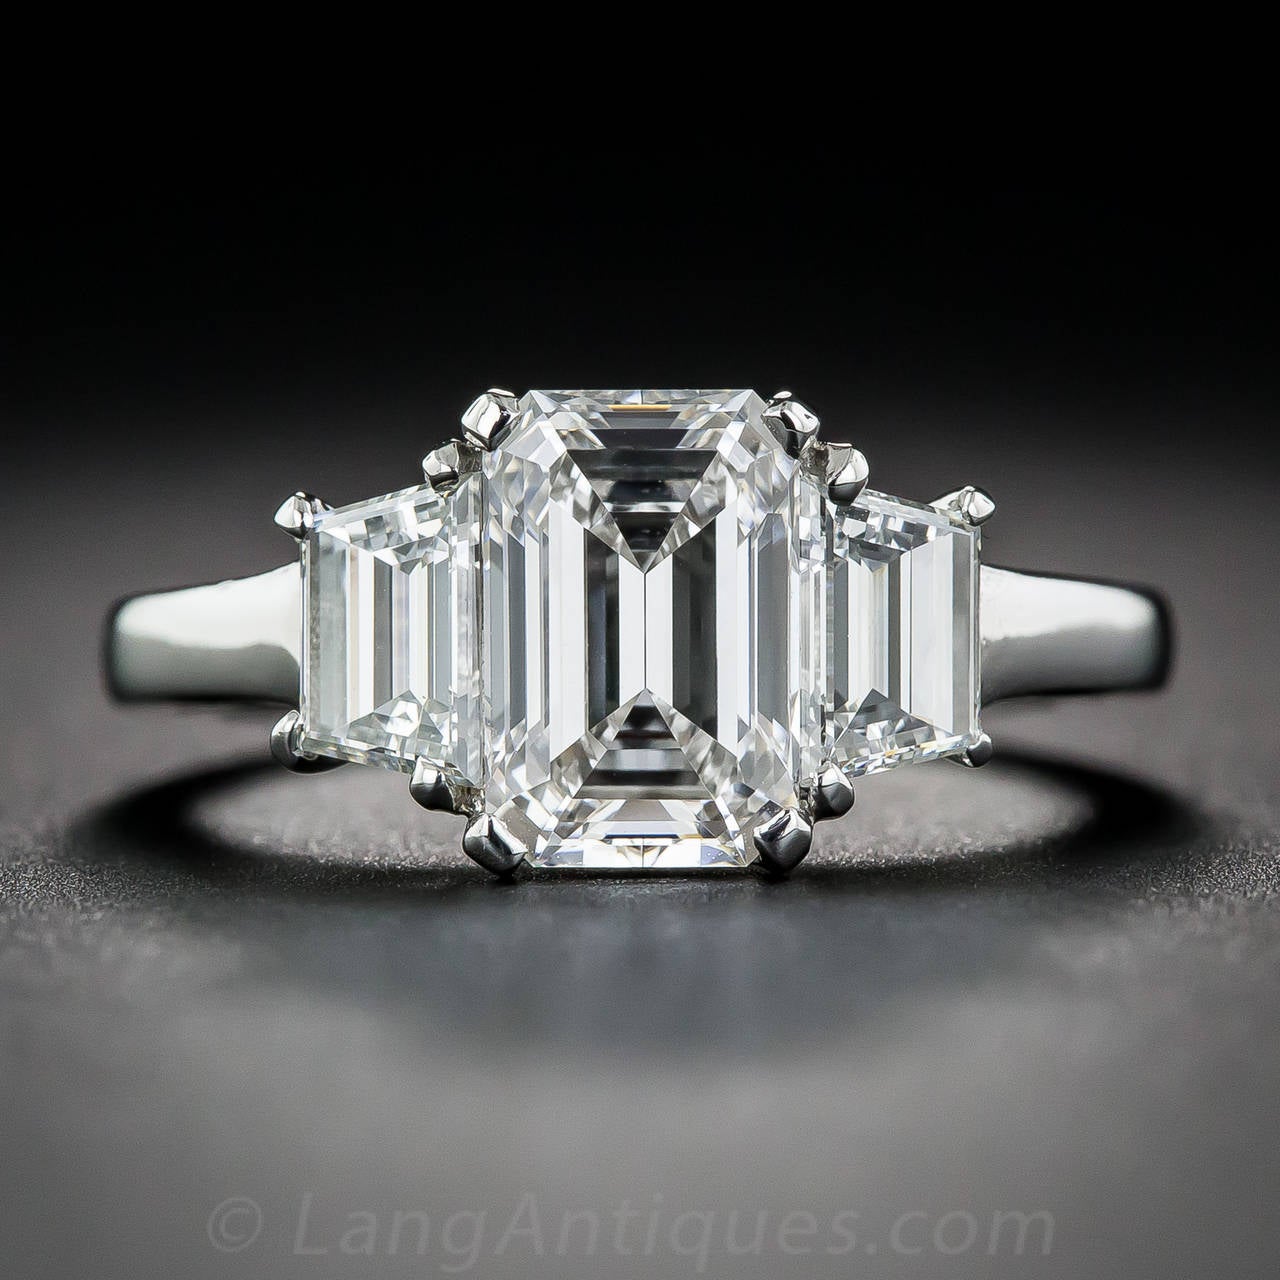 A stunning, classically modeled, emerald-cut diamond, weighing 1.61 carats, is closely embraced on each side by a matching pair trapezoid-cut diamonds (weighing an additional 1.00 carat), creating a continuous flash and sparkle across your finger,